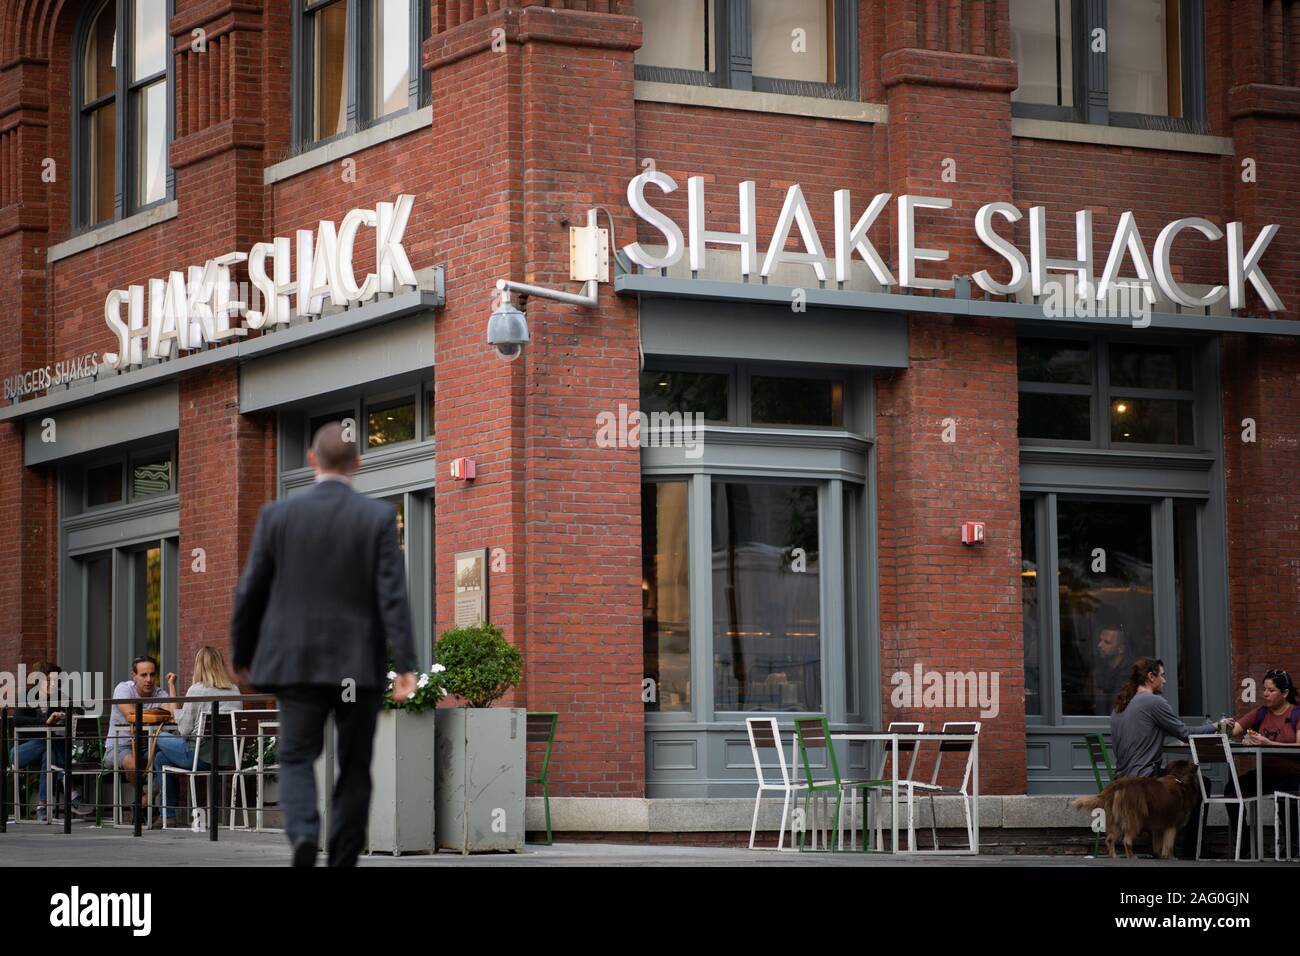 A man walks in front of a Shake Shack storefront in Washington, D.C., as seen on September 8, 2019. (Graeme Sloan/Sipa USA) Stock Photo